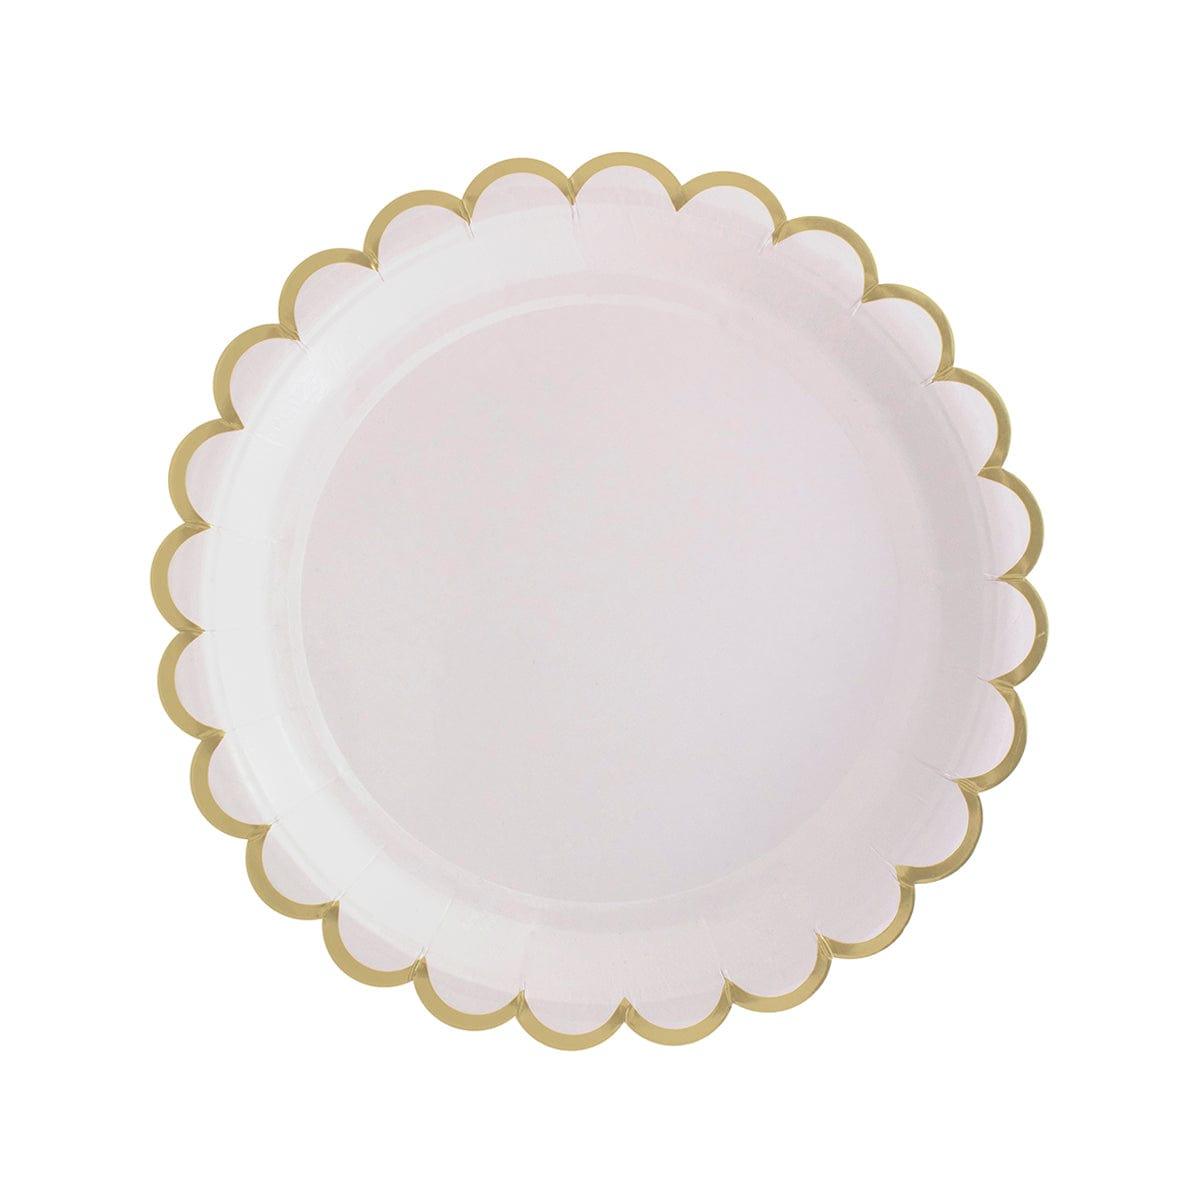 YIWU SANDY PAPER PRODUCTS CO., LTD Everyday Entertaining White Flowers Gold Edge Plates, 9 Inches, 8 Count